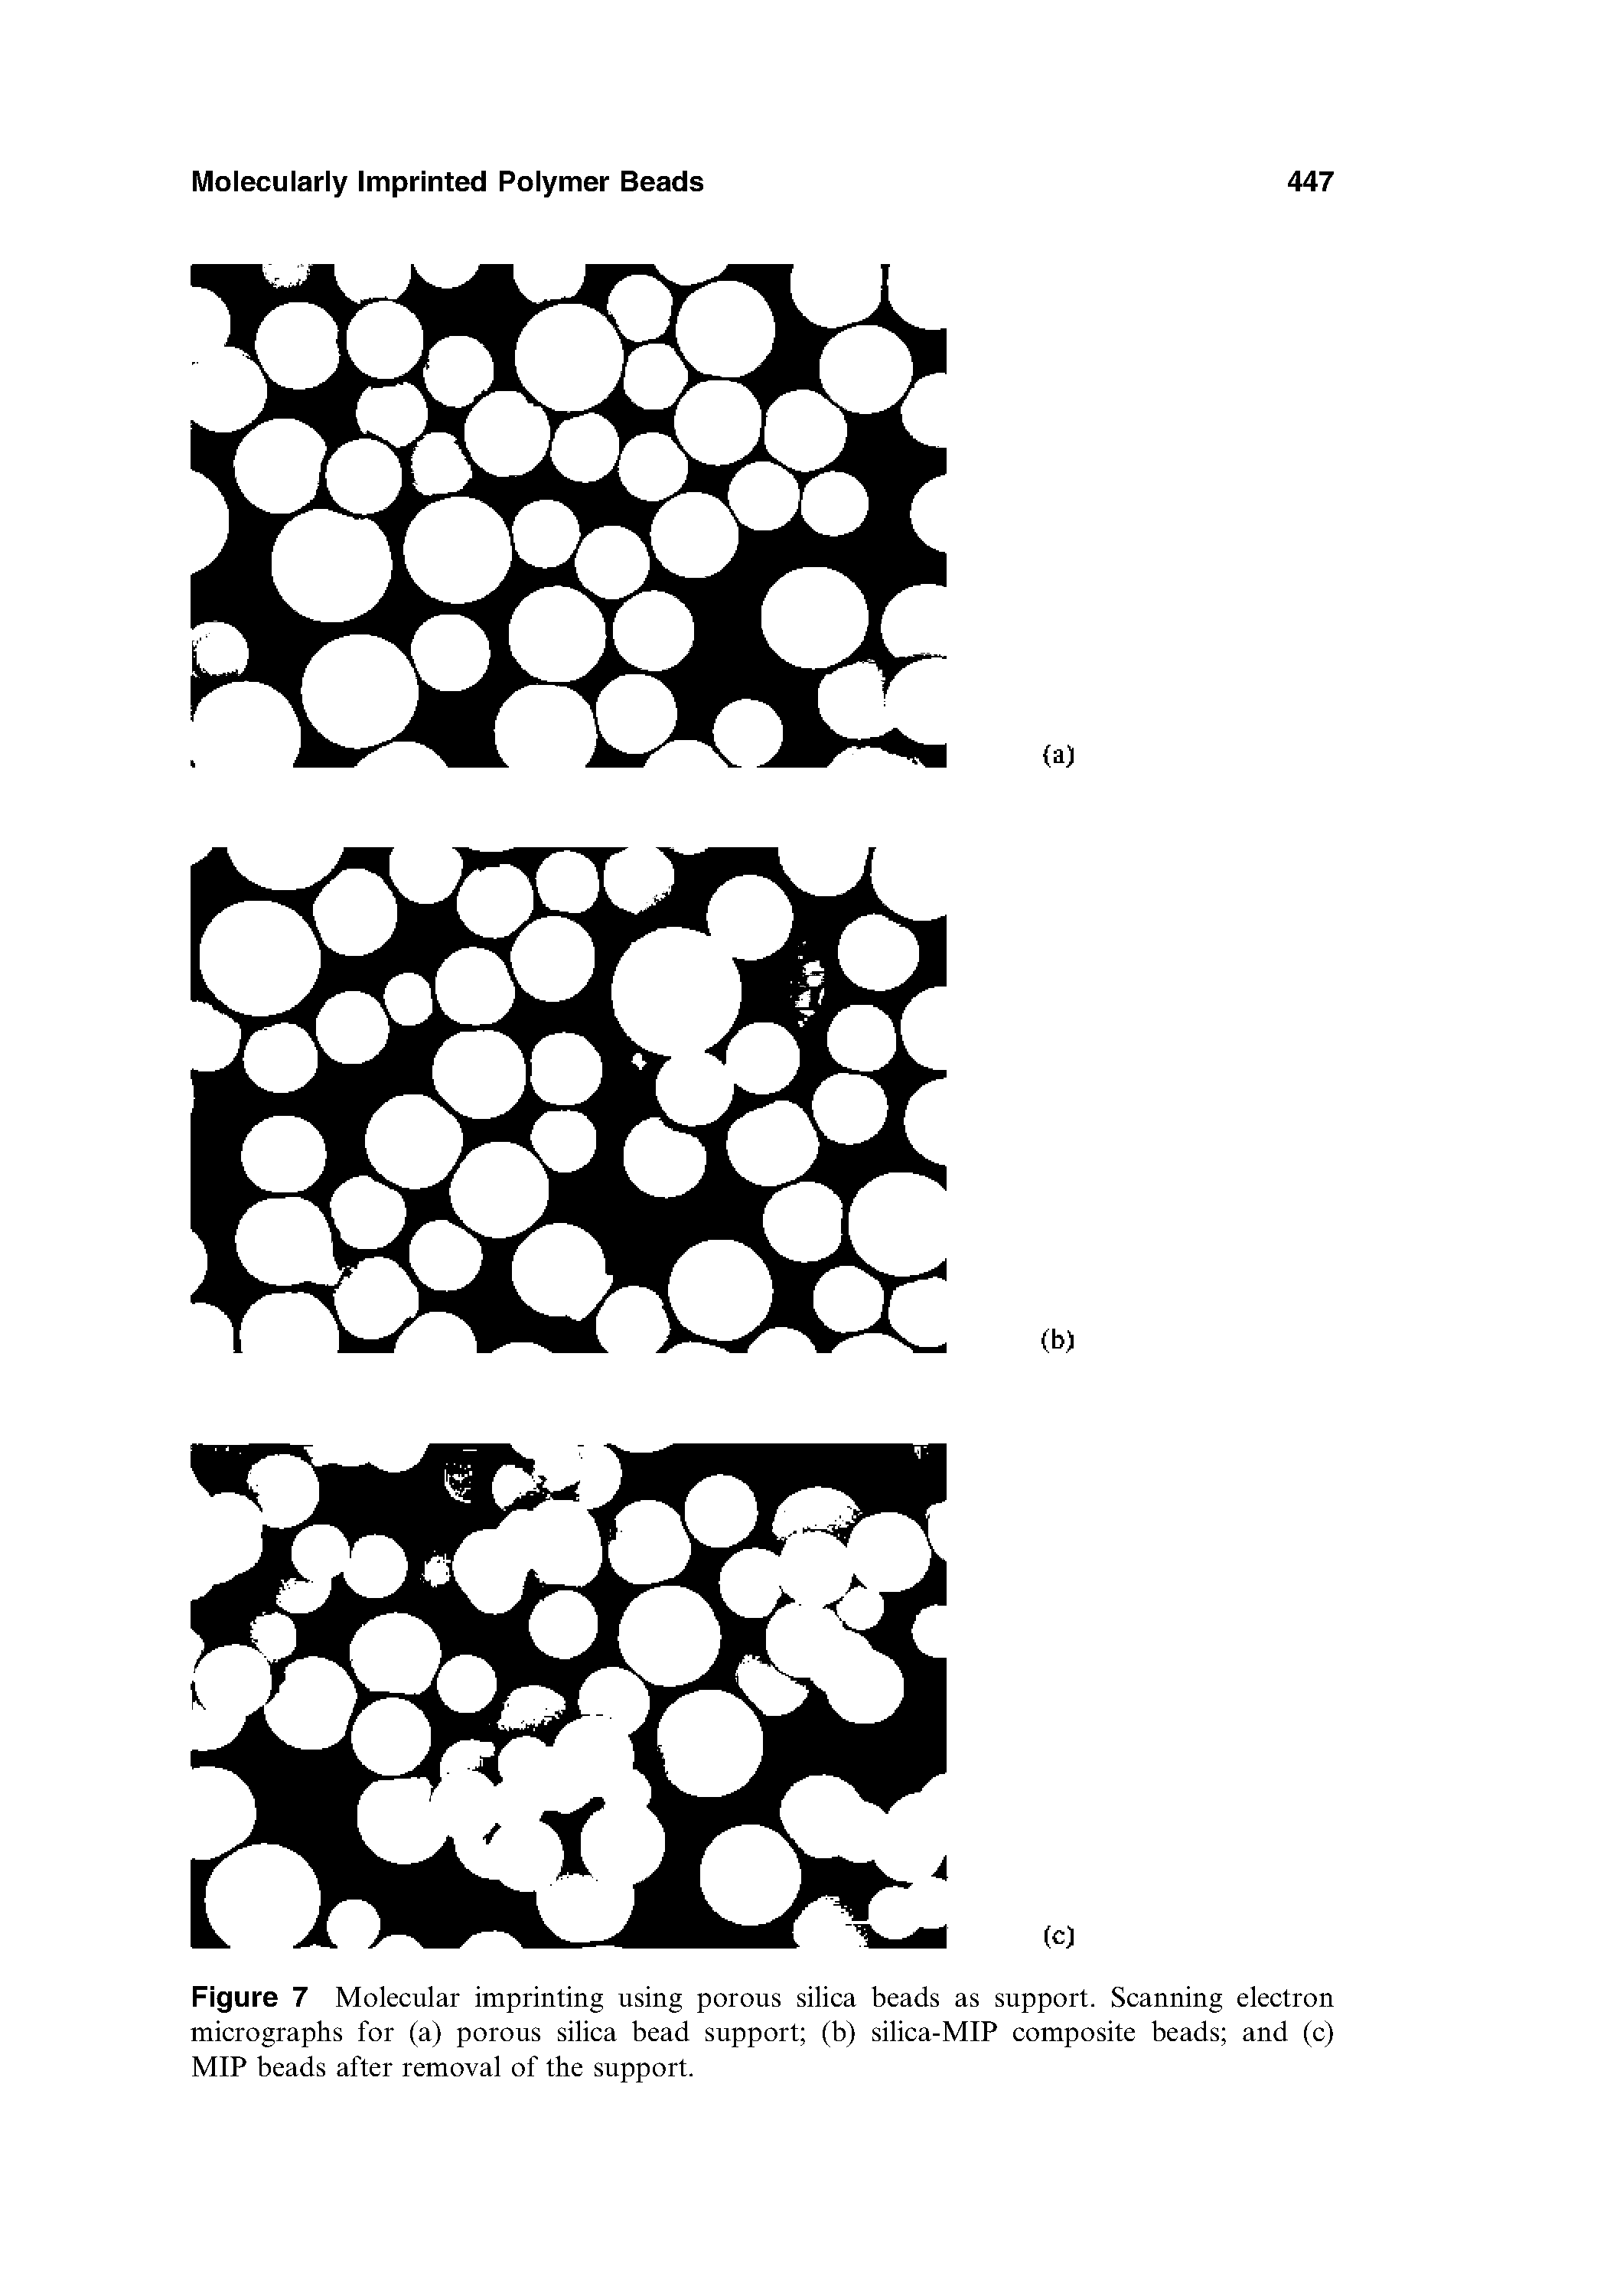 Figure 7 Molecular imprinting using porous silica beads as support. Scanning electron micrographs for (a) porous silica bead support (b) silica-MIP composite beads and (c) MIP beads after removal of the support.